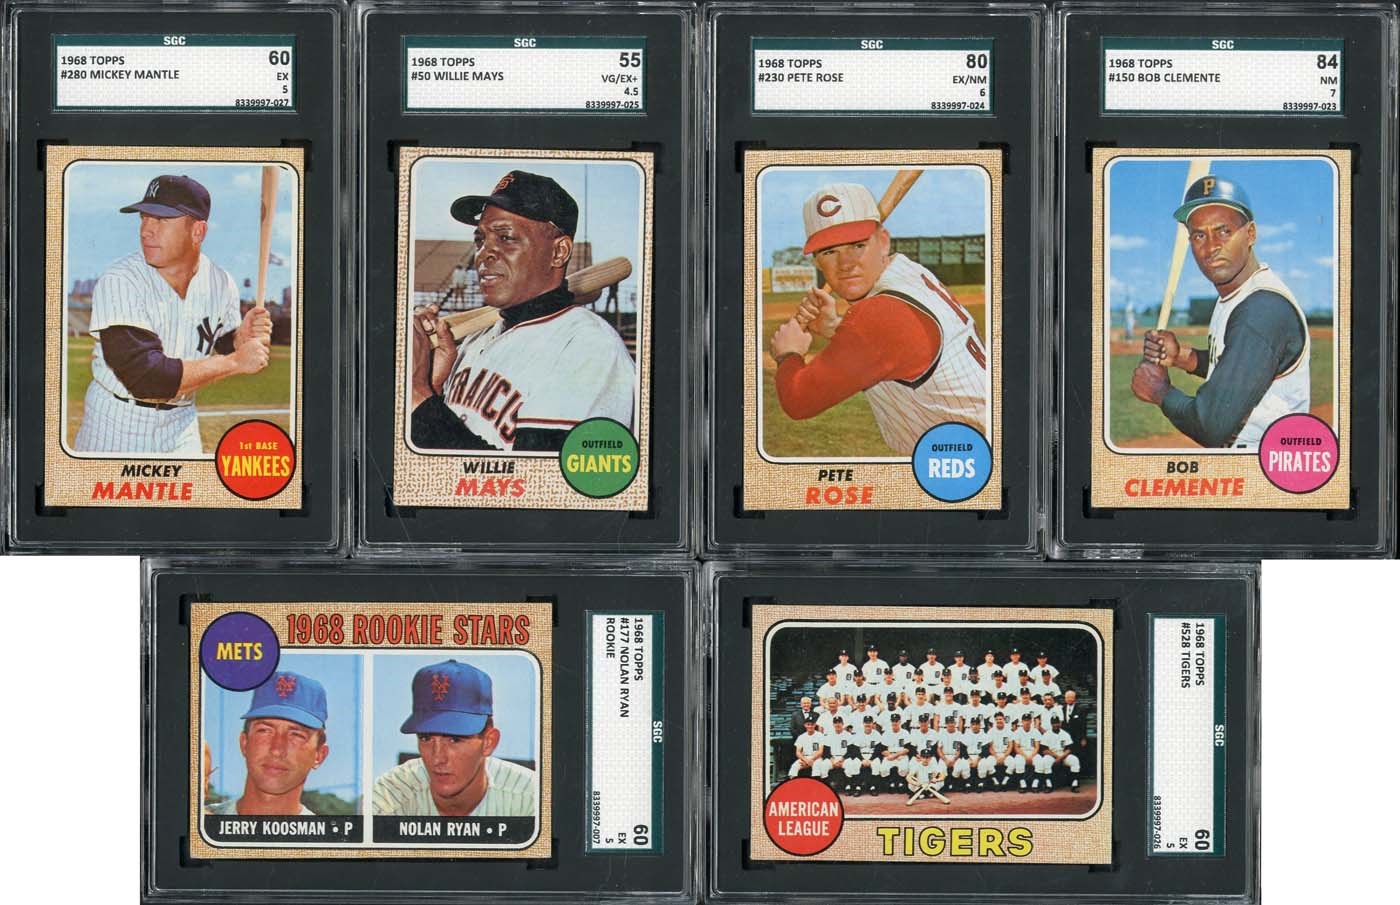 1968 Topps Complete Set of 598 Cards with (6) SGC Graded!